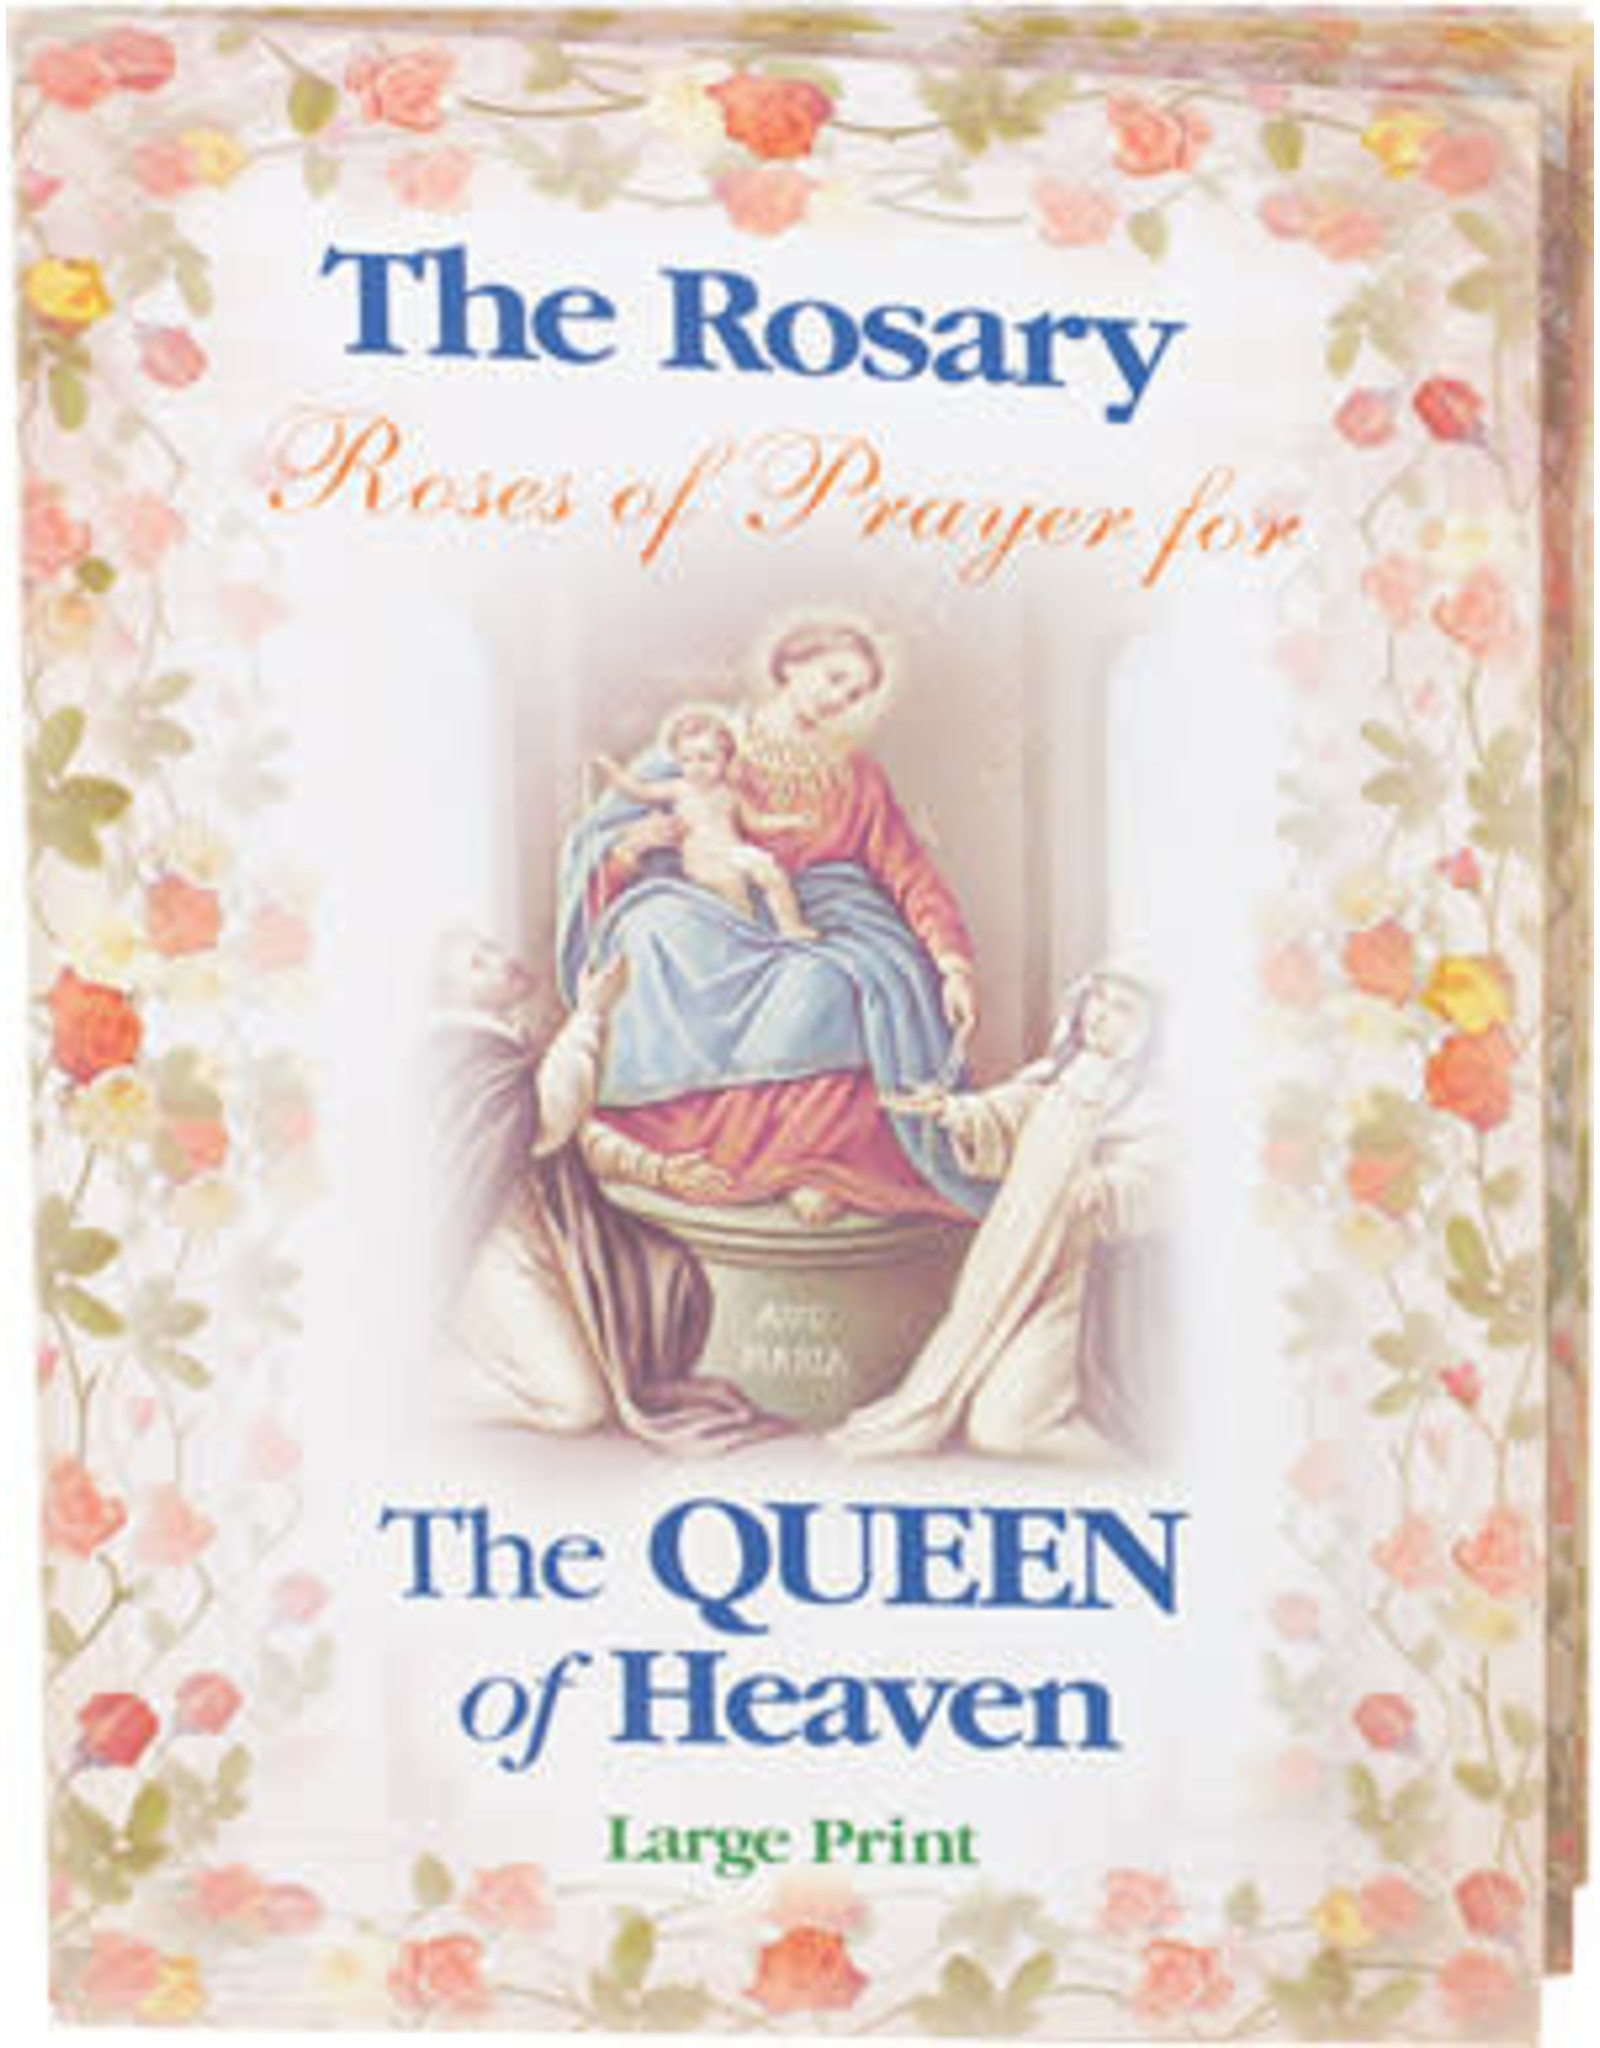 W. H. Litho Co. The Rosary: Roses of Prayer for the Queen of Heaven (Large Print)